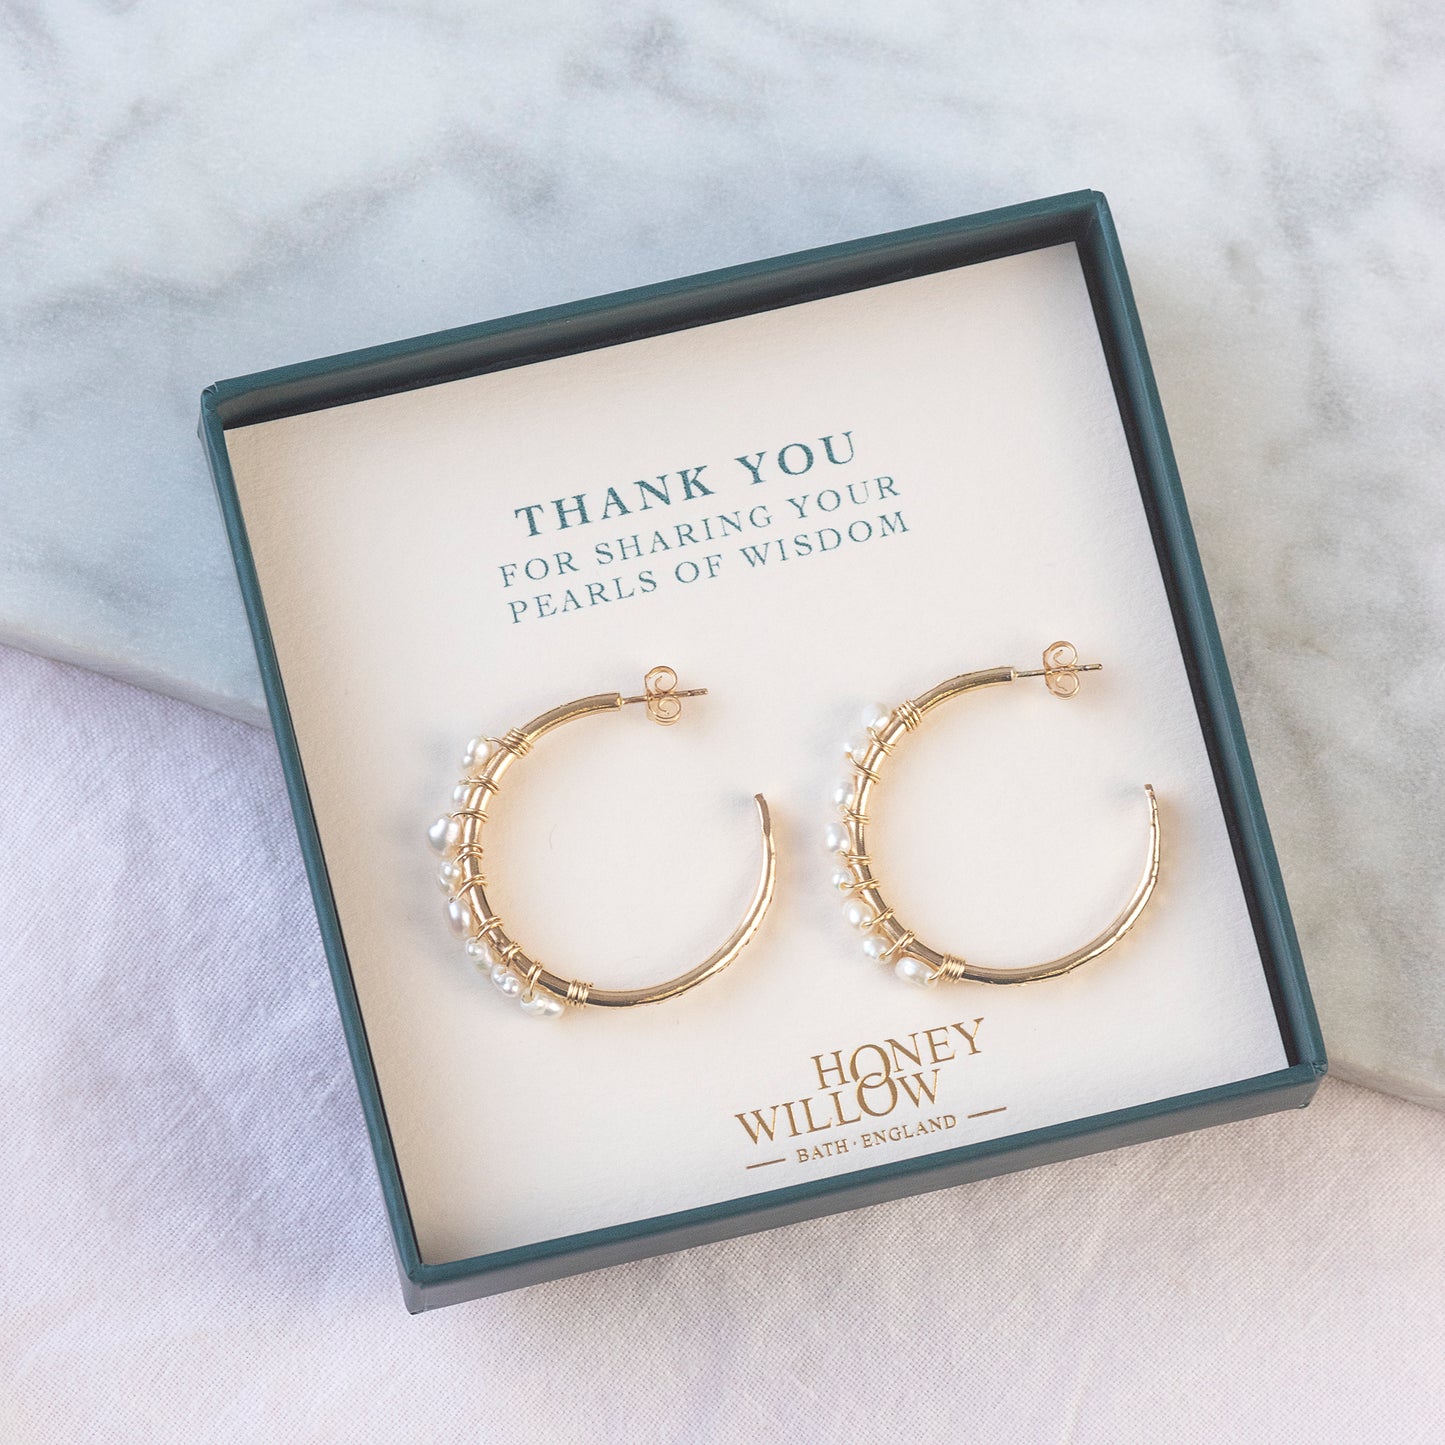 Thank you Gift - Pearls of Wisdom Hoop Earrings - Silver & Gold